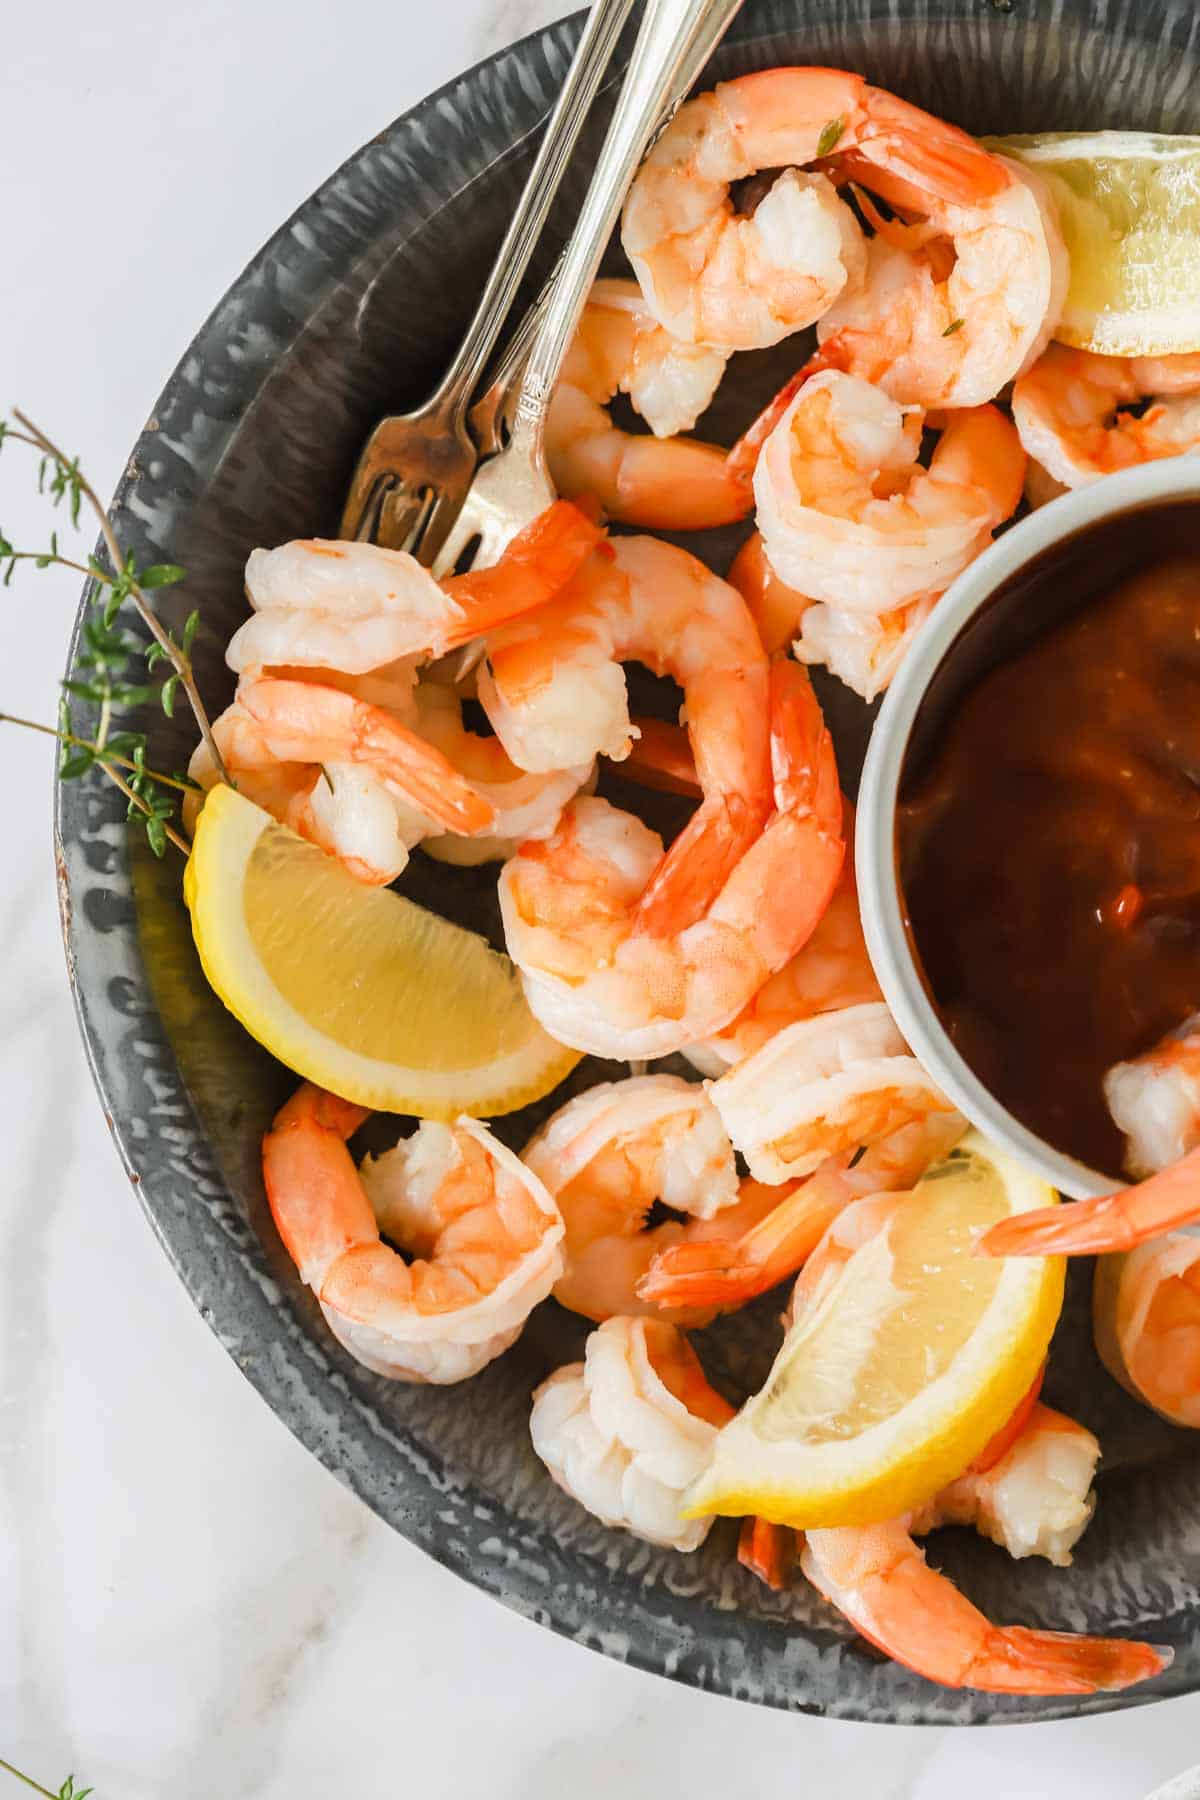 Cocktail shrimp in a bowl with lemon wedges and cocktail sauce.